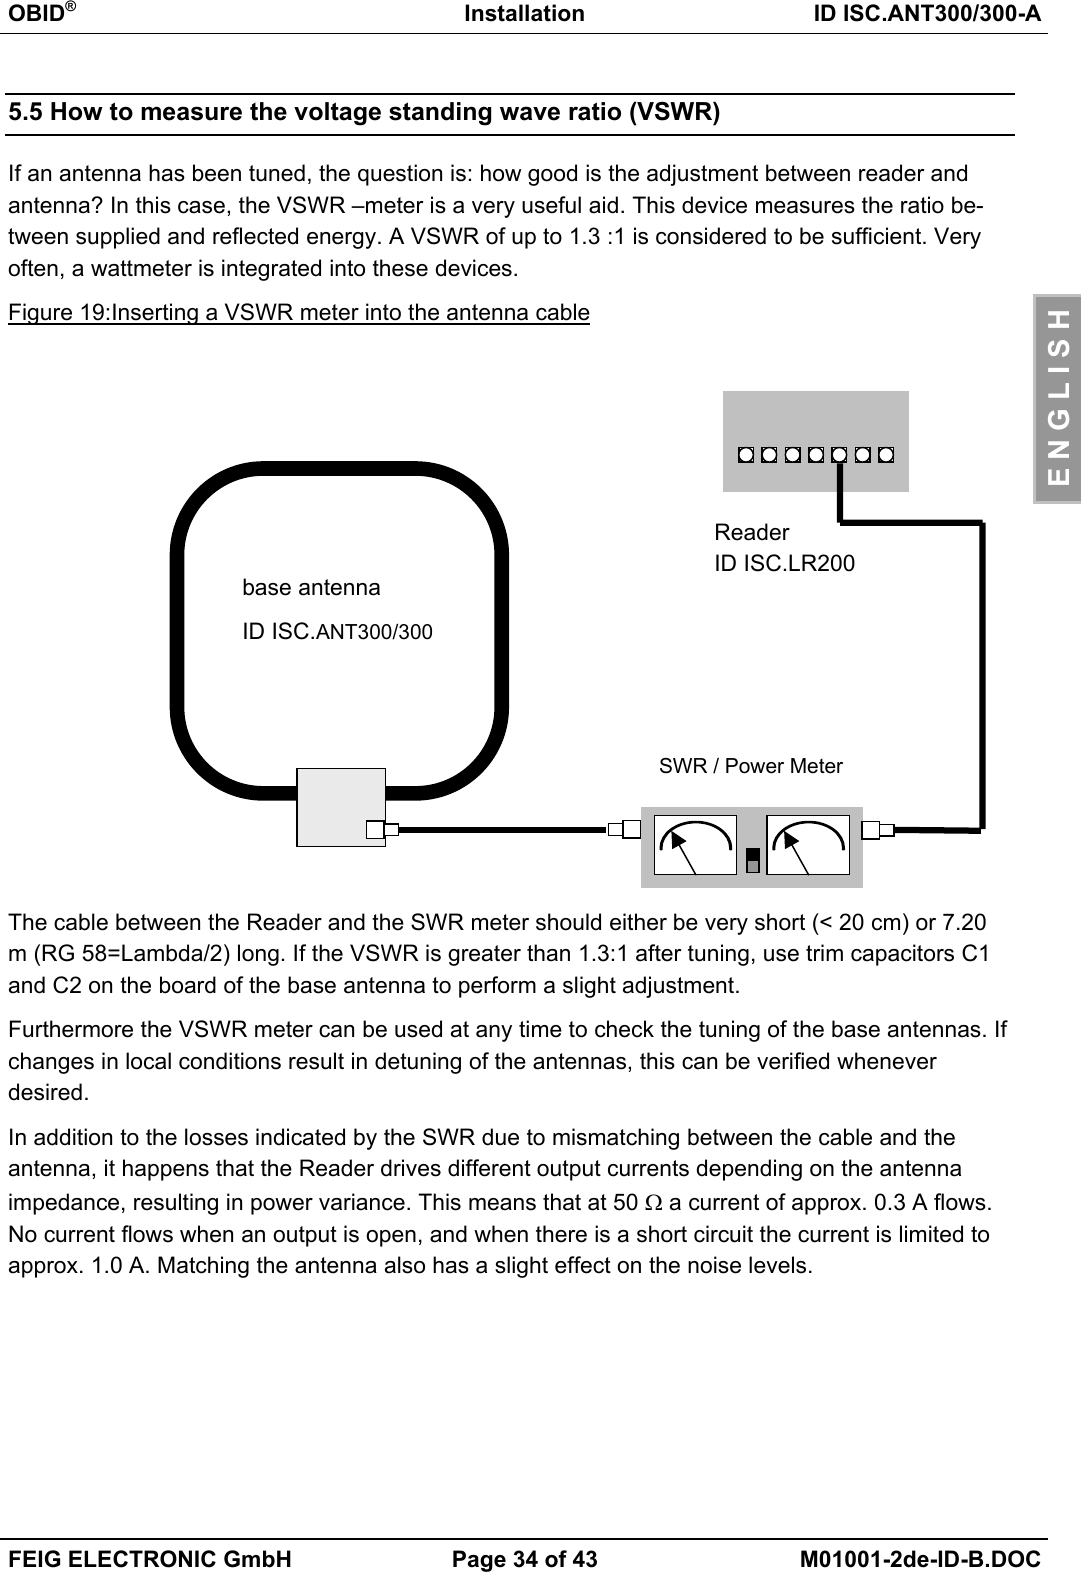 OBID®Installation ID ISC.ANT300/300-AFEIG ELECTRONIC GmbH Page 34 of 43 M01001-2de-ID-B.DOCE N G L I S H5.5 How to measure the voltage standing wave ratio (VSWR)If an antenna has been tuned, the question is: how good is the adjustment between reader andantenna? In this case, the VSWR –meter is a very useful aid. This device measures the ratio be-tween supplied and reflected energy. A VSWR of up to 1.3 :1 is considered to be sufficient. Veryoften, a wattmeter is integrated into these devices.Figure 19:Inserting a VSWR meter into the antenna cableThe cable between the Reader and the SWR meter should either be very short (&lt; 20 cm) or 7.20m (RG 58=Lambda/2) long. If the VSWR is greater than 1.3:1 after tuning, use trim capacitors C1and C2 on the board of the base antenna to perform a slight adjustment.Furthermore the VSWR meter can be used at any time to check the tuning of the base antennas. Ifchanges in local conditions result in detuning of the antennas, this can be verified wheneverdesired.In addition to the losses indicated by the SWR due to mismatching between the cable and theantenna, it happens that the Reader drives different output currents depending on the antennaimpedance, resulting in power variance. This means that at 50 Ω a current of approx. 0.3 A flows.No current flows when an output is open, and when there is a short circuit the current is limited toapprox. 1.0 A. Matching the antenna also has a slight effect on the noise levels.base antennaID ISC.ANT300/300SWR / Power MeterReaderID ISC.LR200